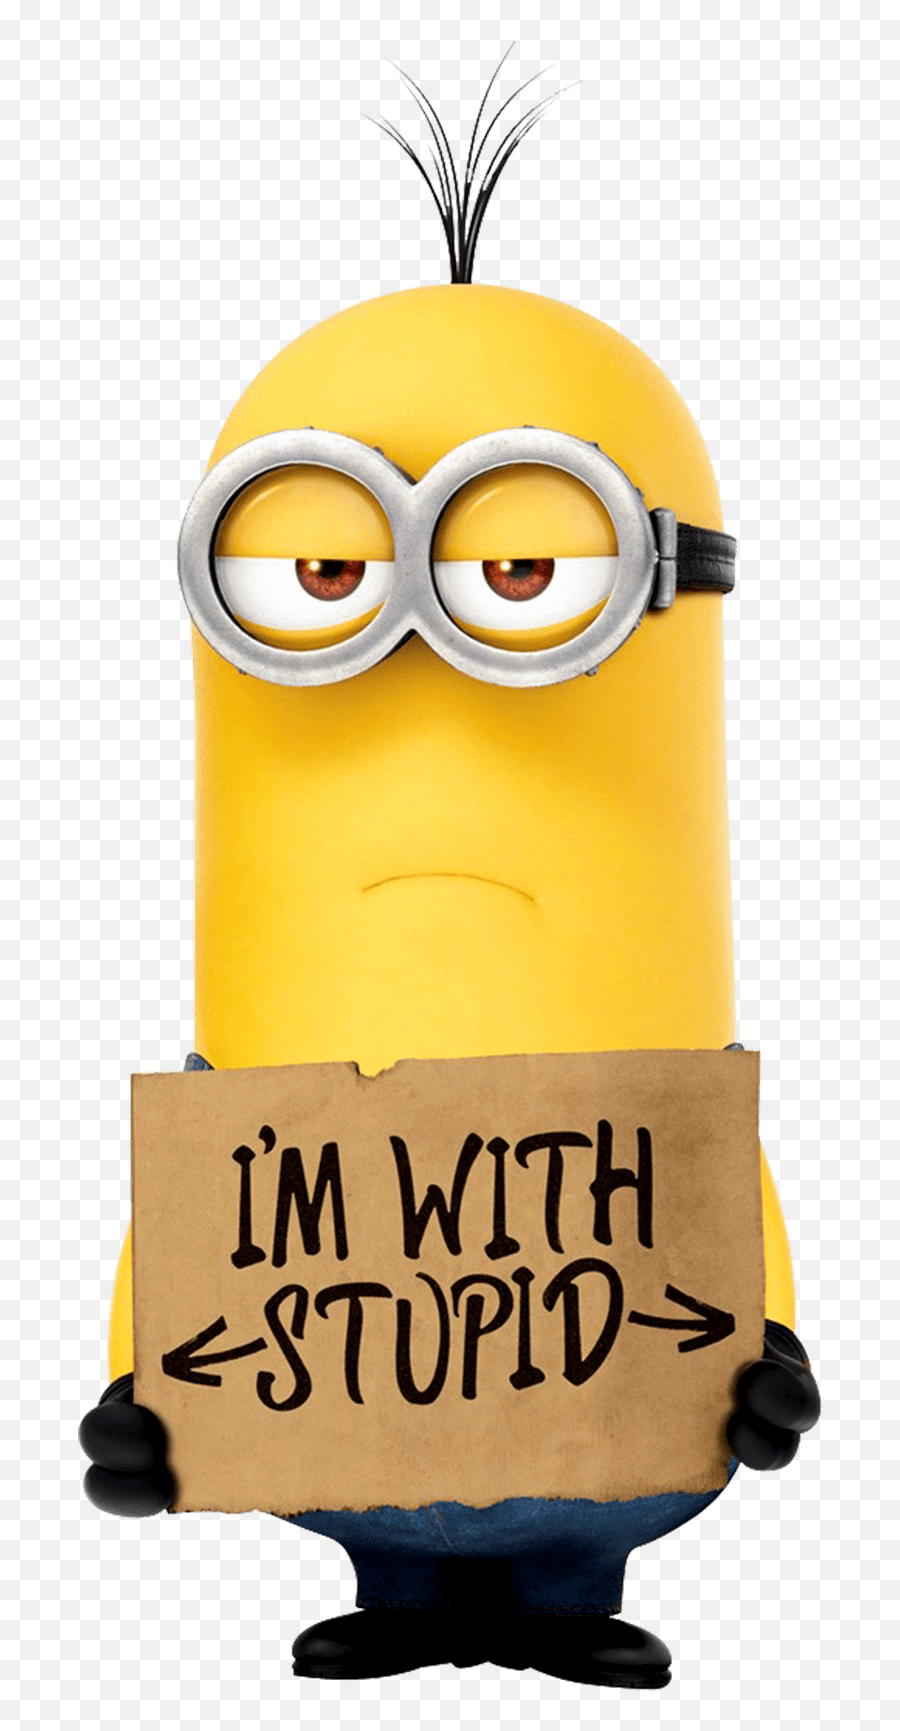 Despicable Me Minion Png Image Free Download Searchpngcom - Iphone 6 Cartoon Wallpaper Iphone,Minion Png